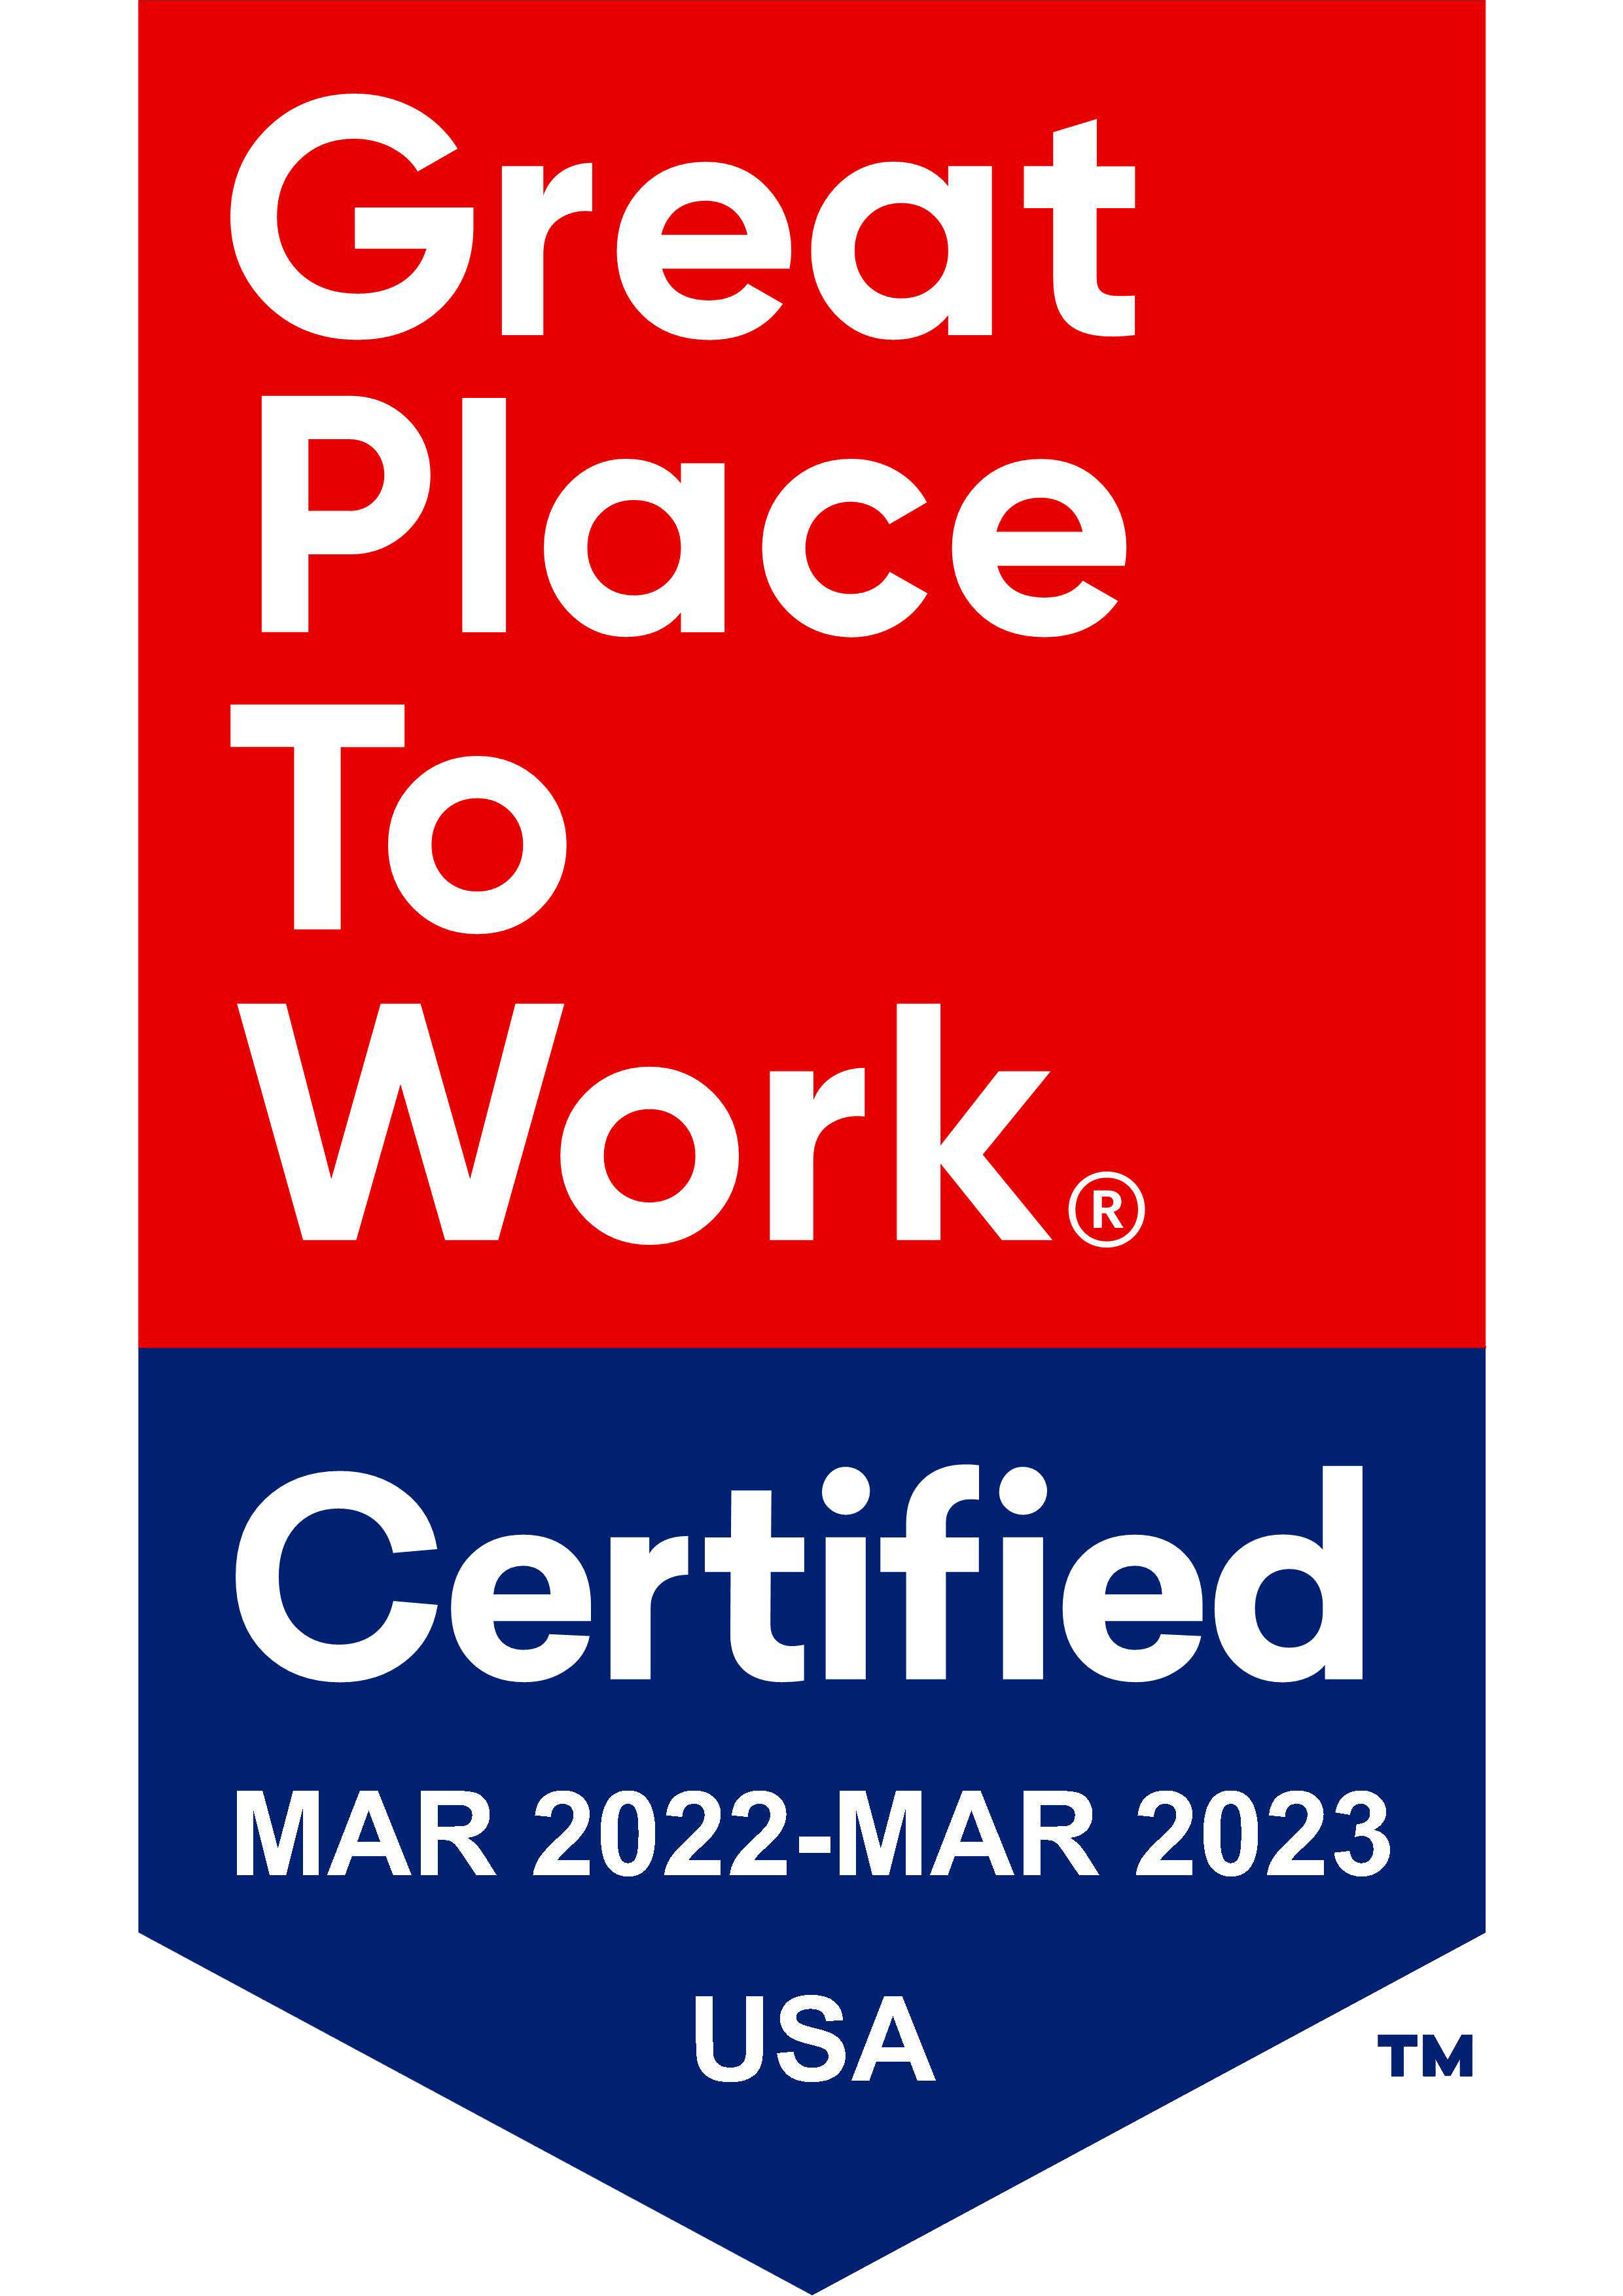 Great Place to Work Certified Badge